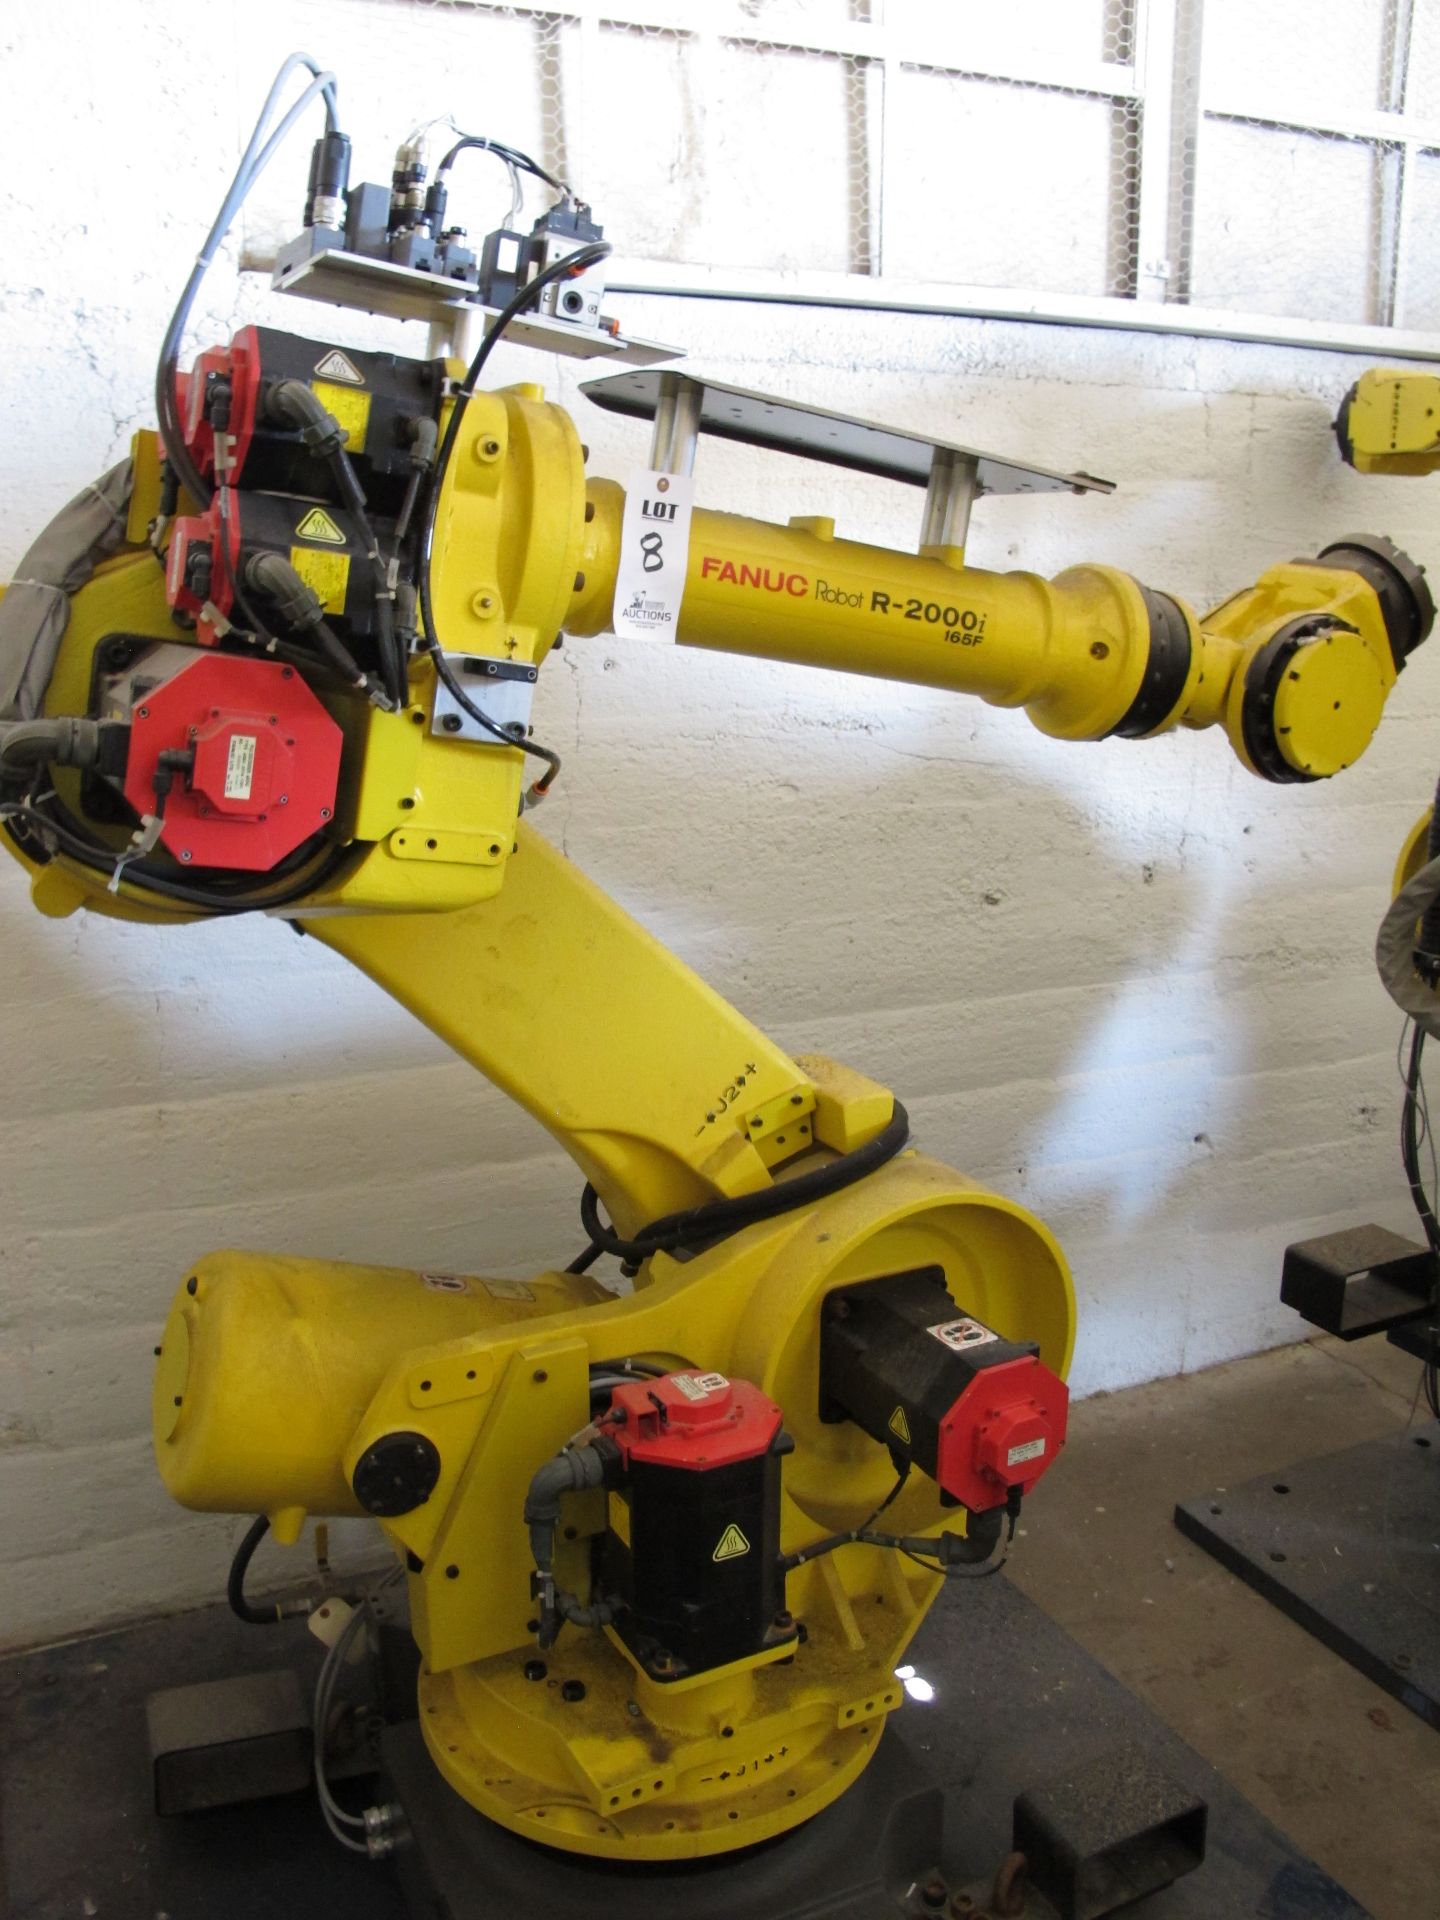 FANUC INDUSTRIAL JOINTED ARM ROBOT, MODEL R-2000i 165F, TYPE A05B-1324-B203, MANUFACTURED MAY